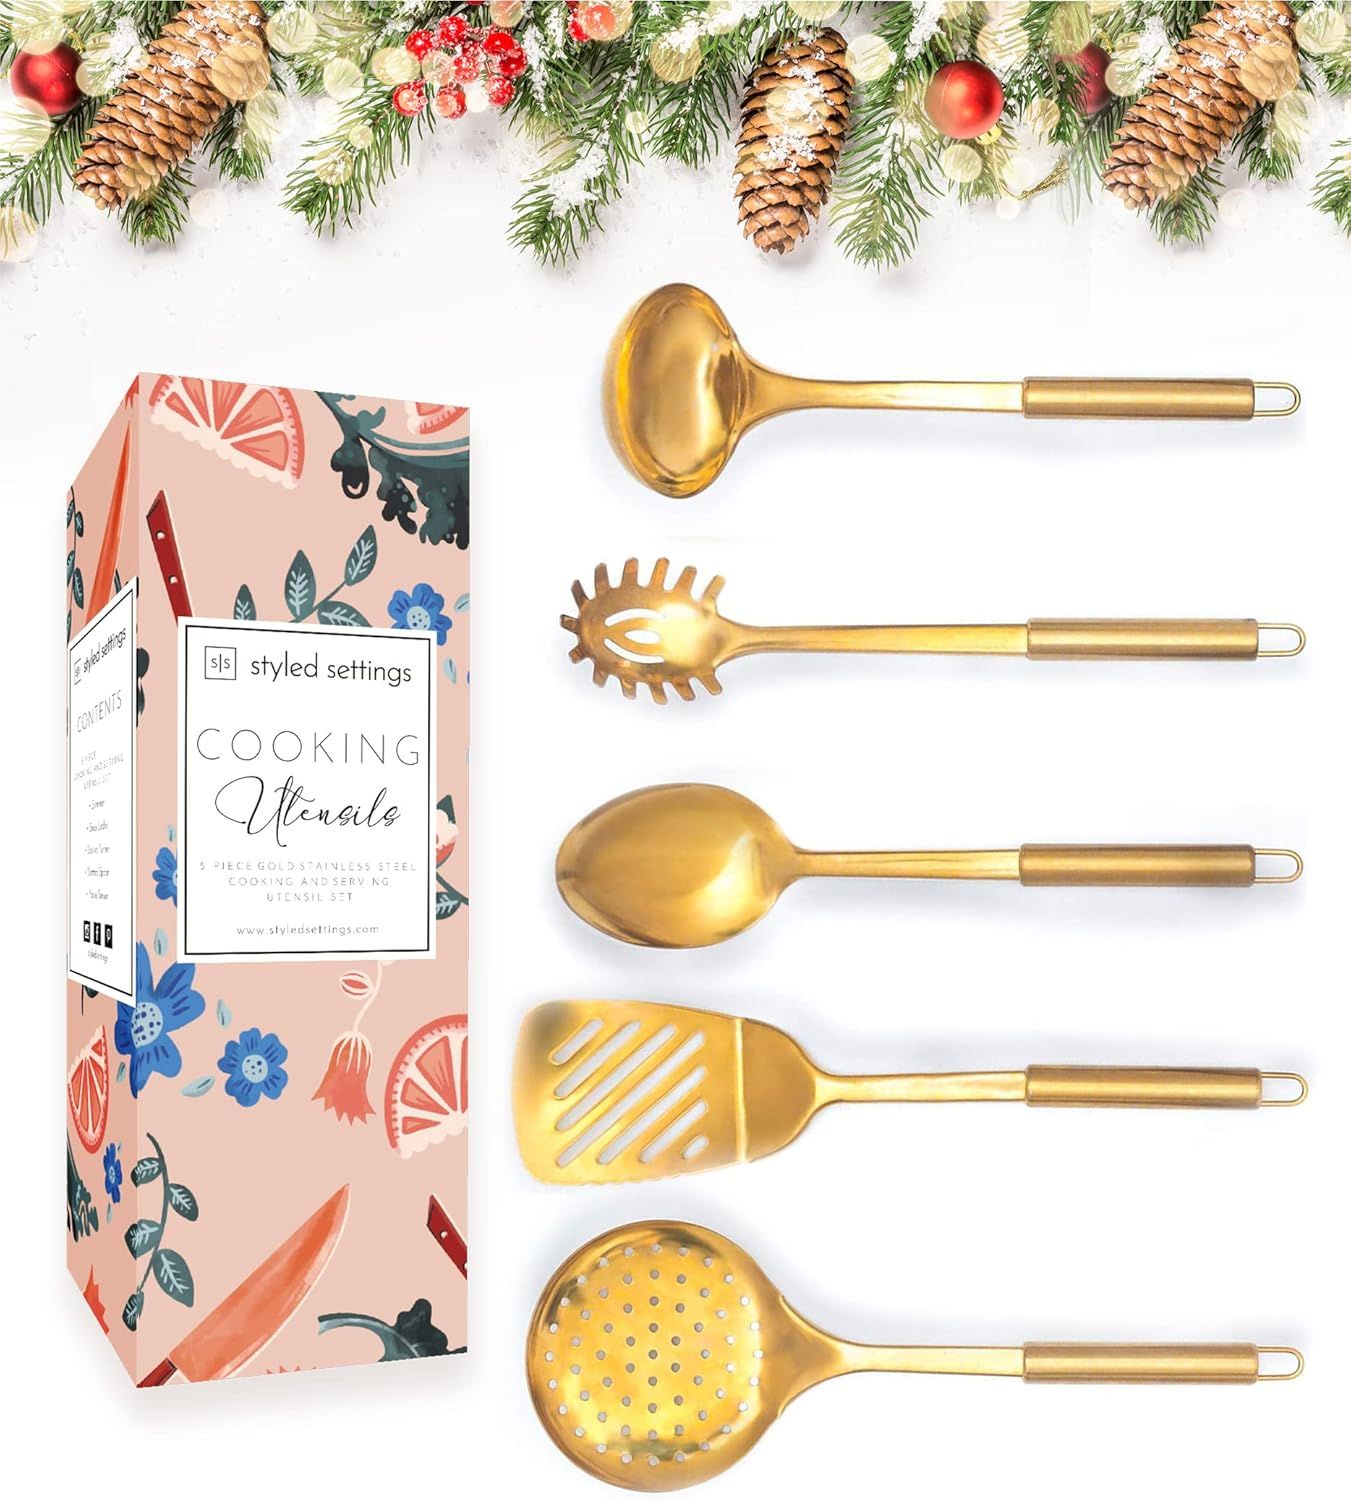 Brass/Gold Cooking Utensils for Modern Cooking and Serving, Gold Utensils - Stainless Steel Cooki... | Amazon (US)